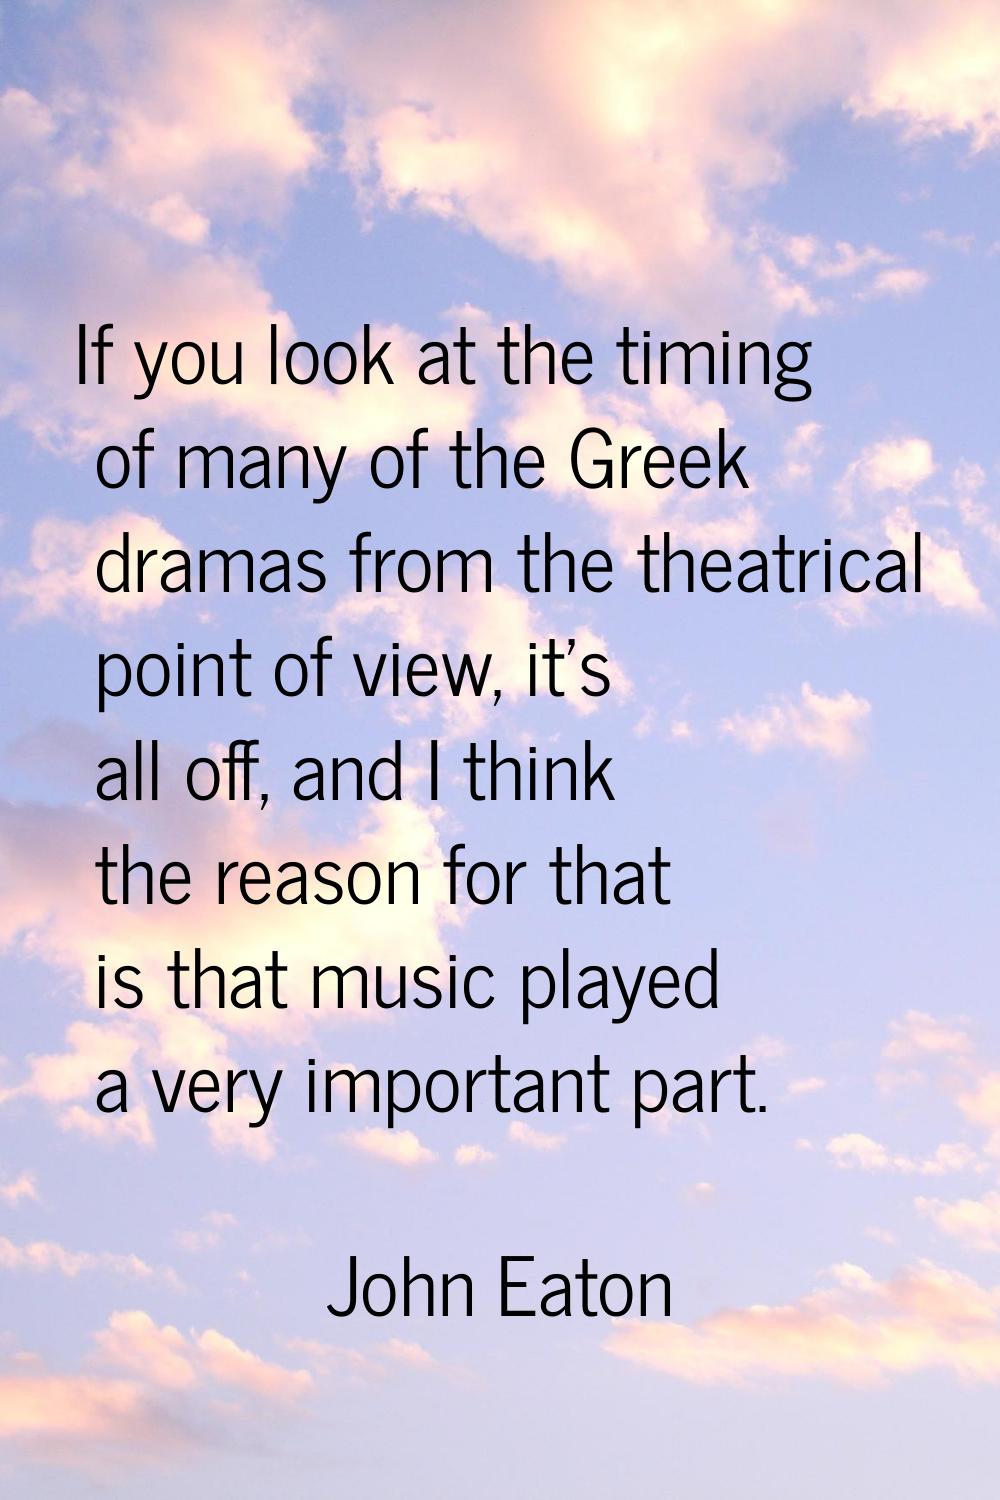 If you look at the timing of many of the Greek dramas from the theatrical point of view, it's all o